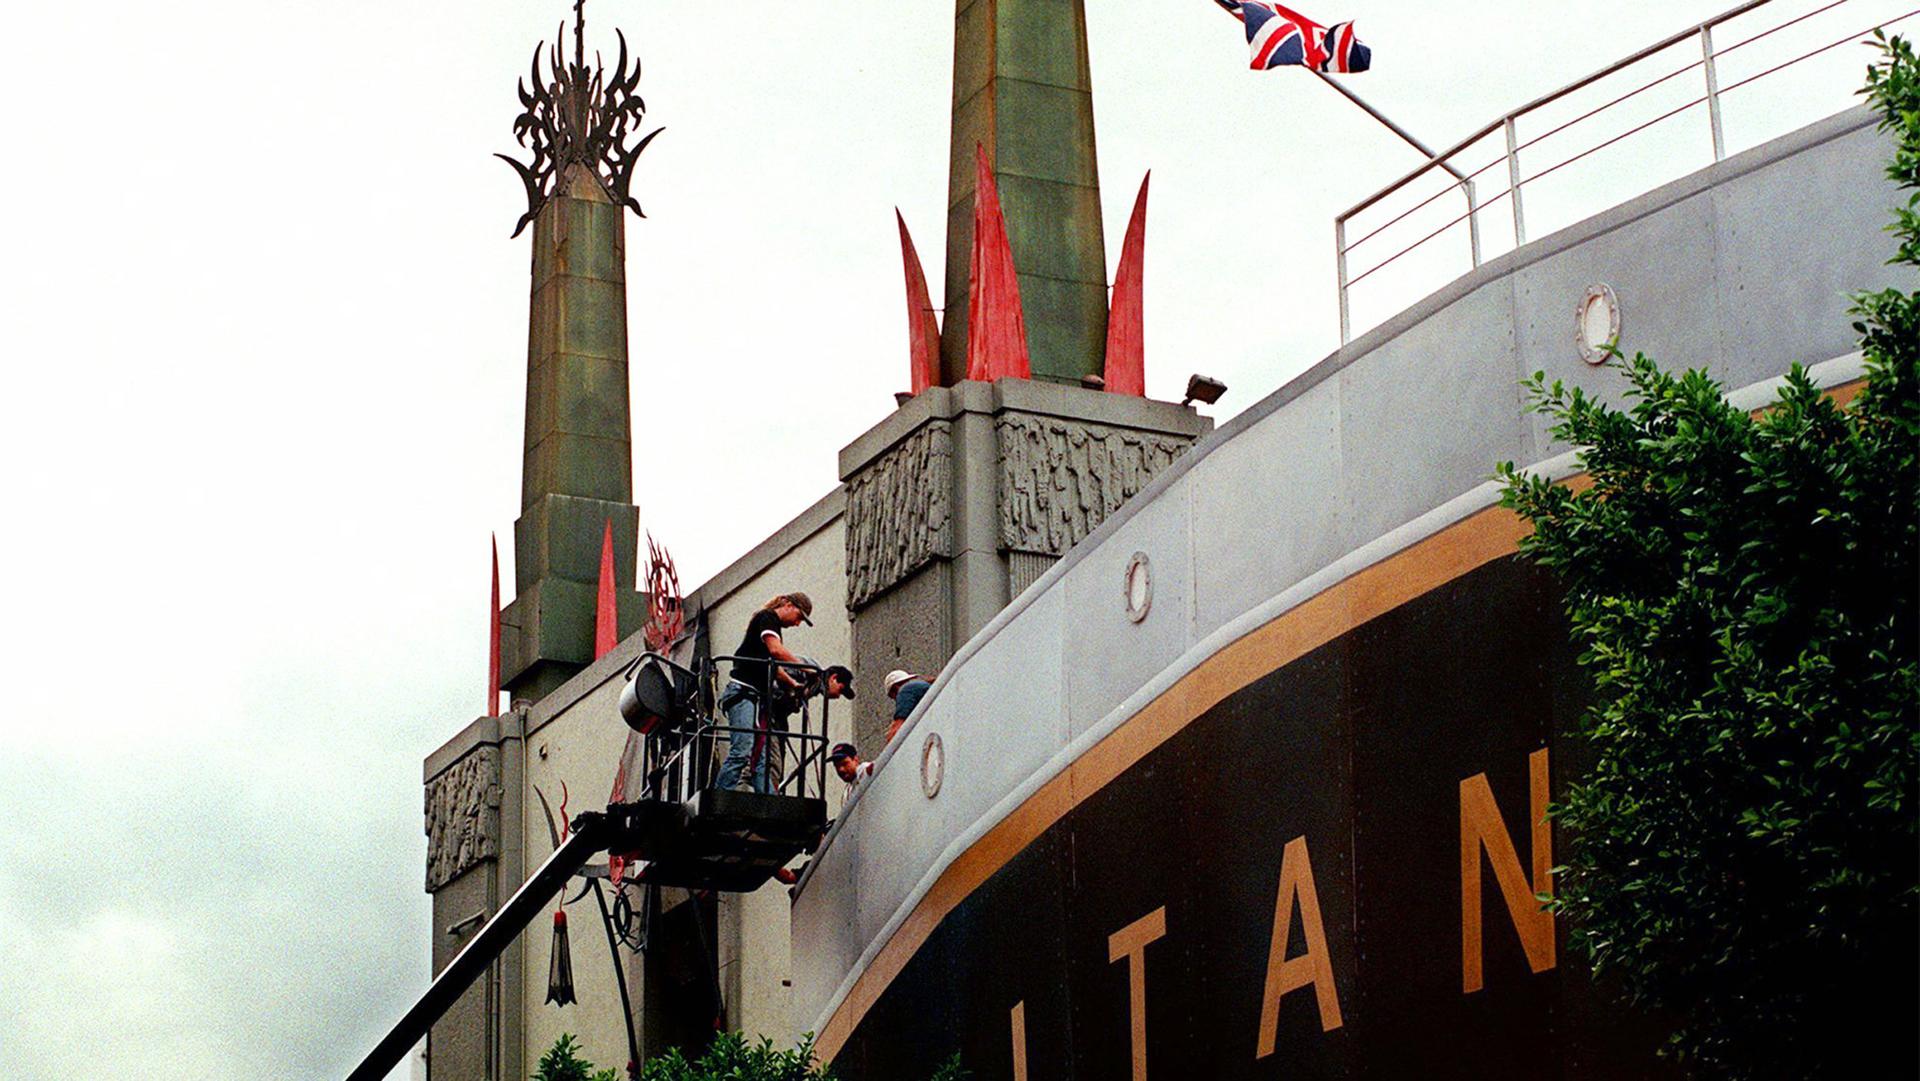 Men working on the facade of a Titanic replica in China